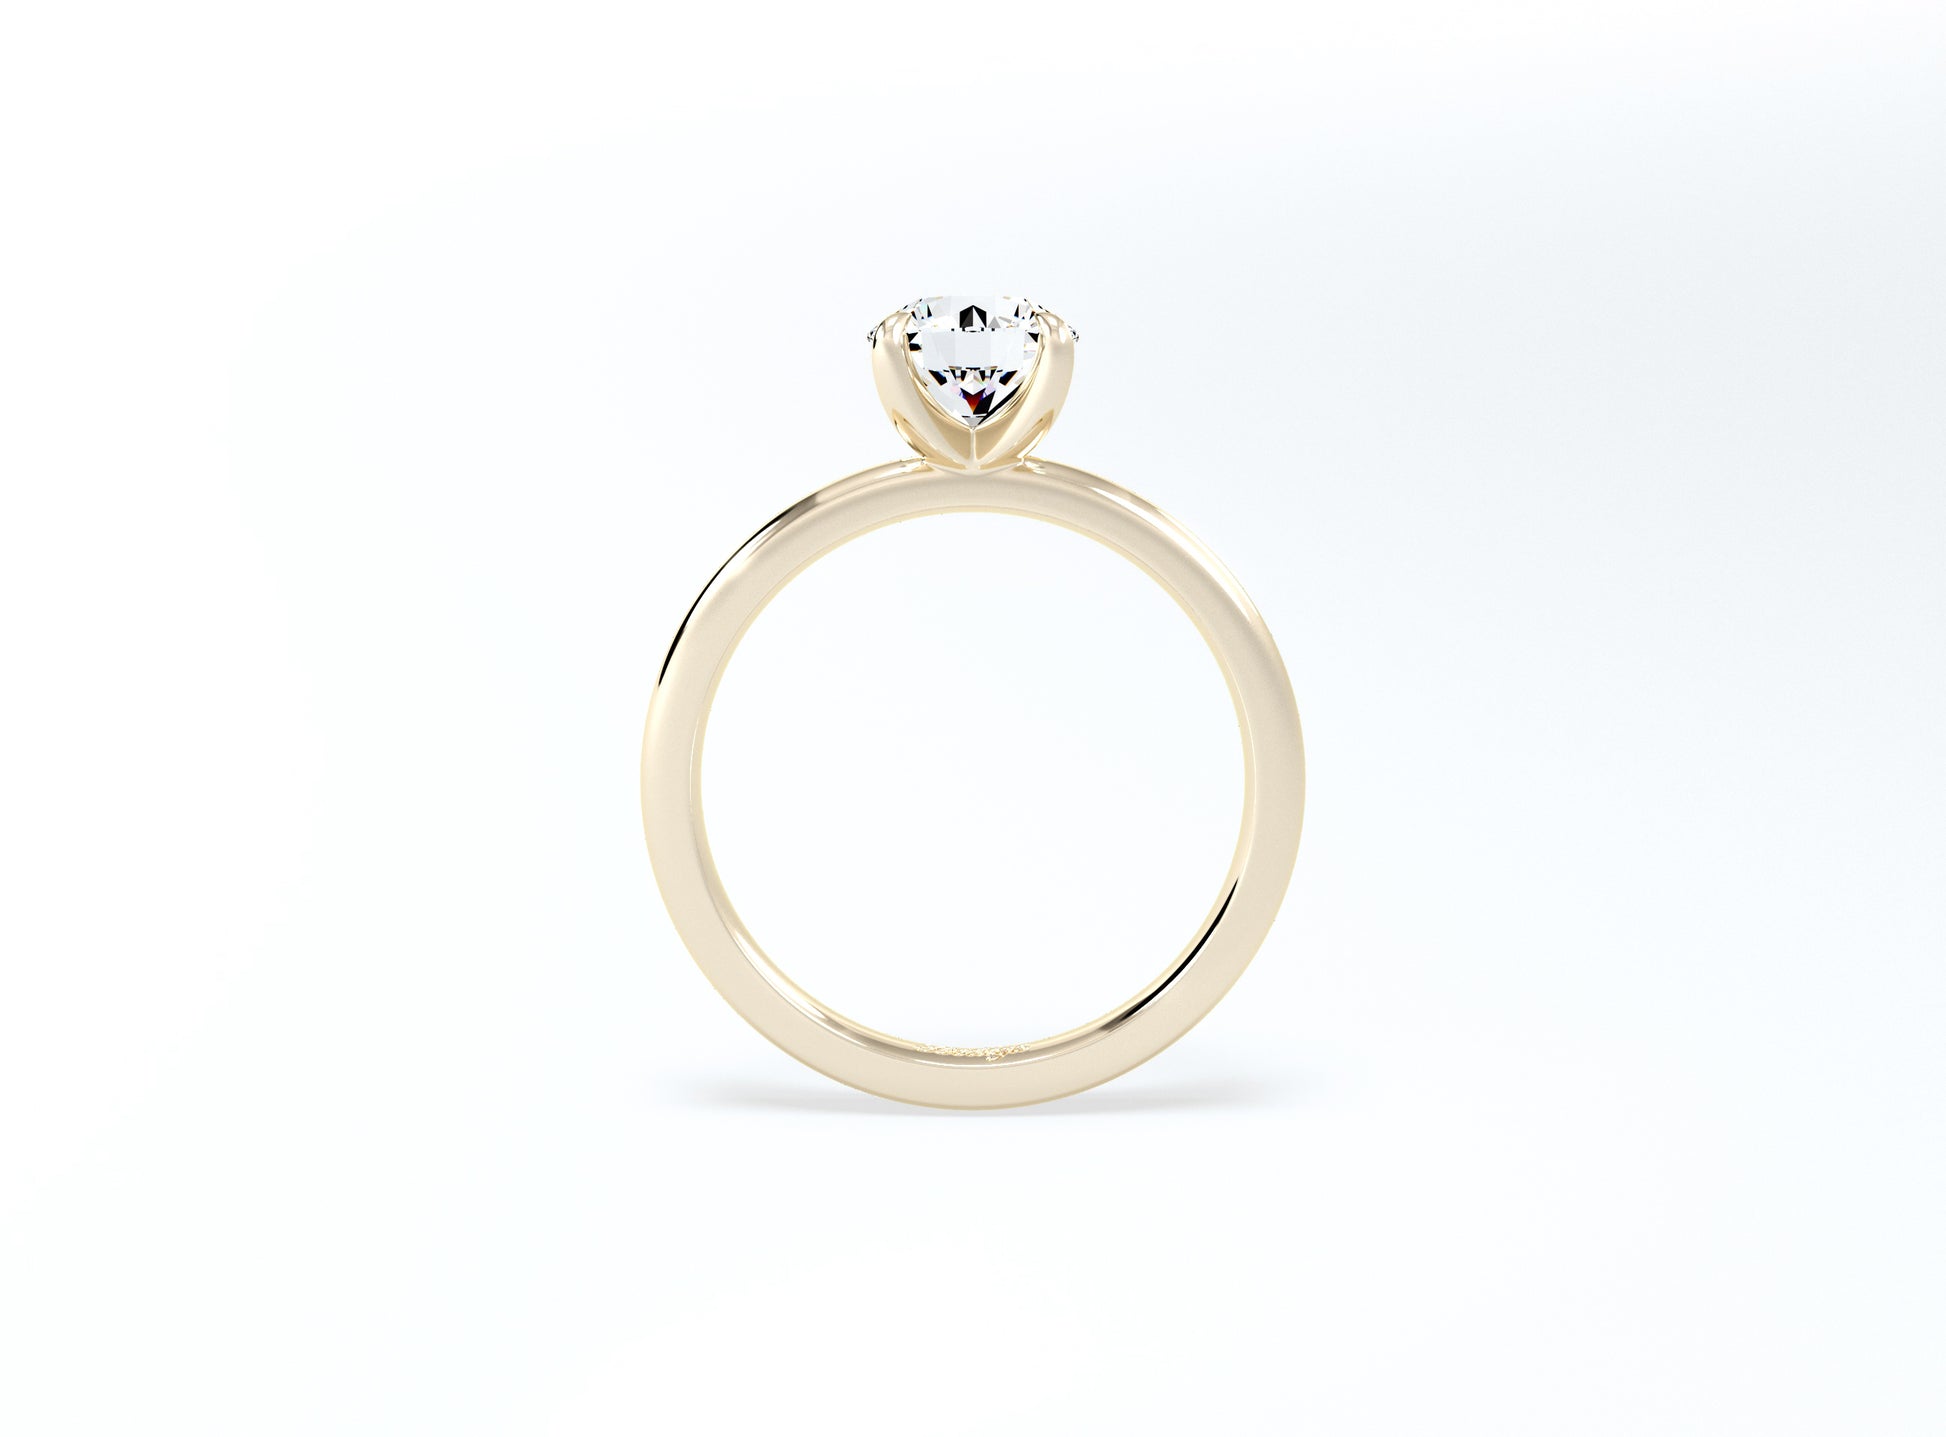 4 Claw Round Brilliant Solitaire Ring - Yellow Gold - Bodega